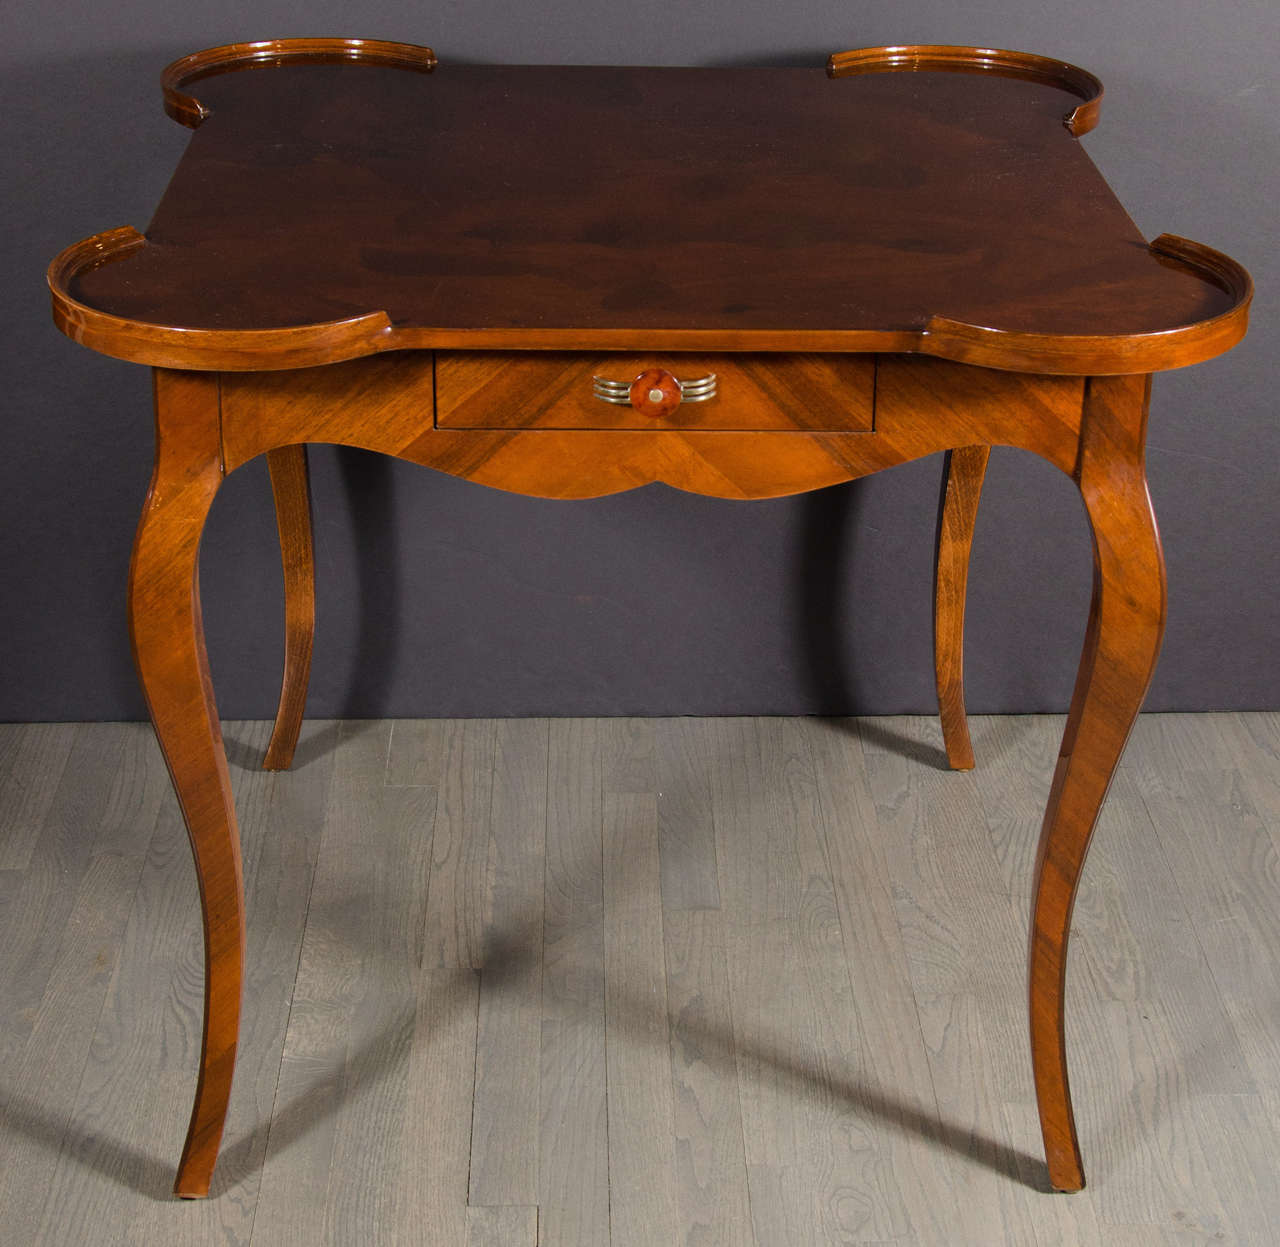 This elegant classic Art Deco game table was realized in France, circa 1925. Handmade in exotic burled walnut, it features rectangular cabriolet style legs; an apron with undulating curves on its bottom; and a drawer with its original streamlined